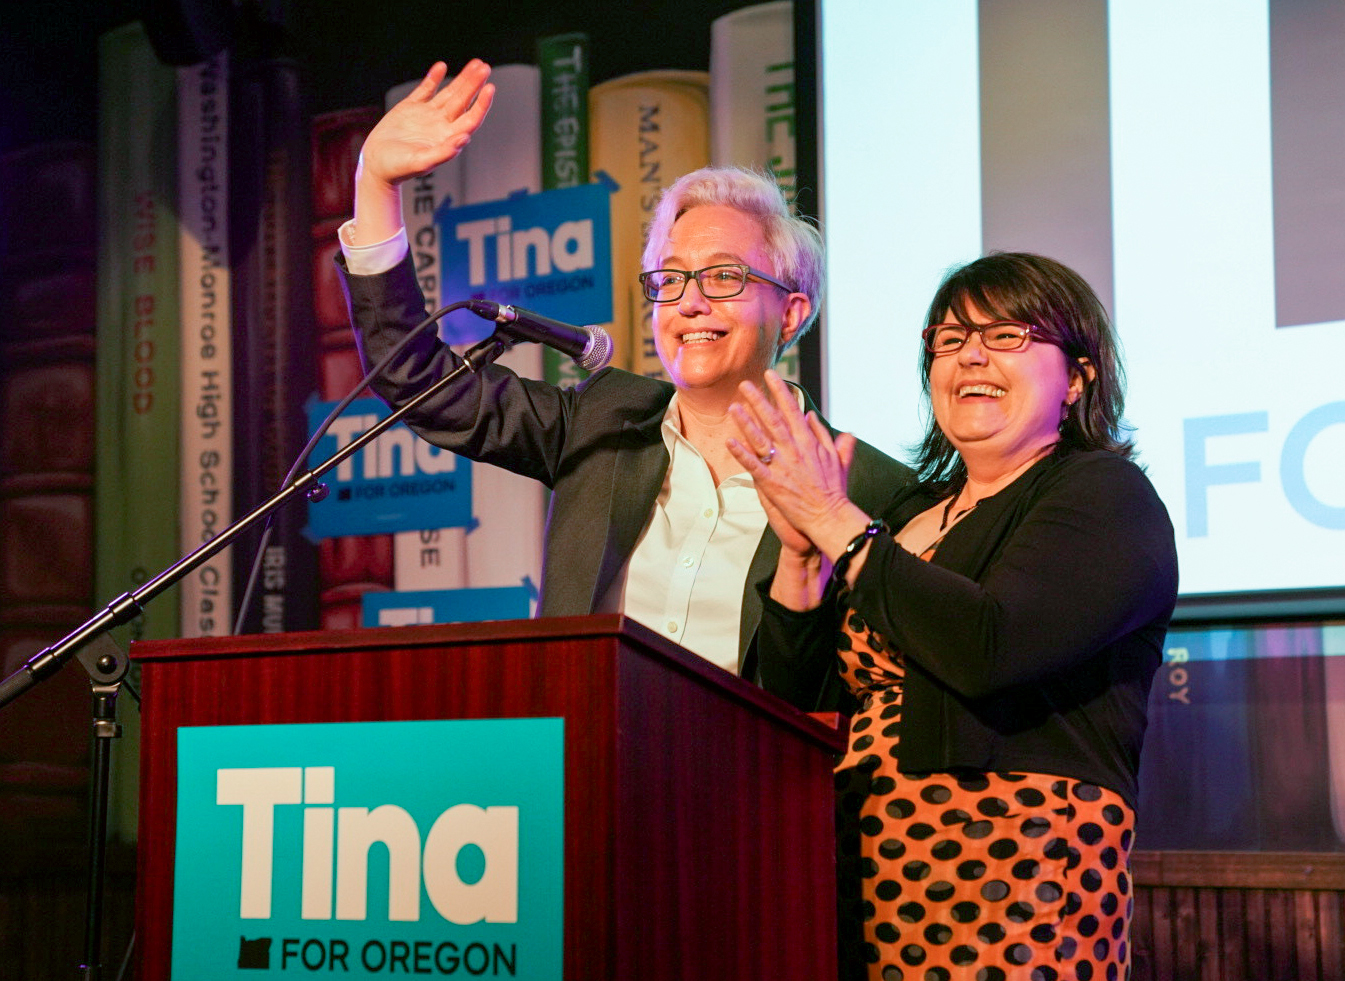 As Tina Koteks bid for Oregon governor gains steam, a workplace complaint lingers pic